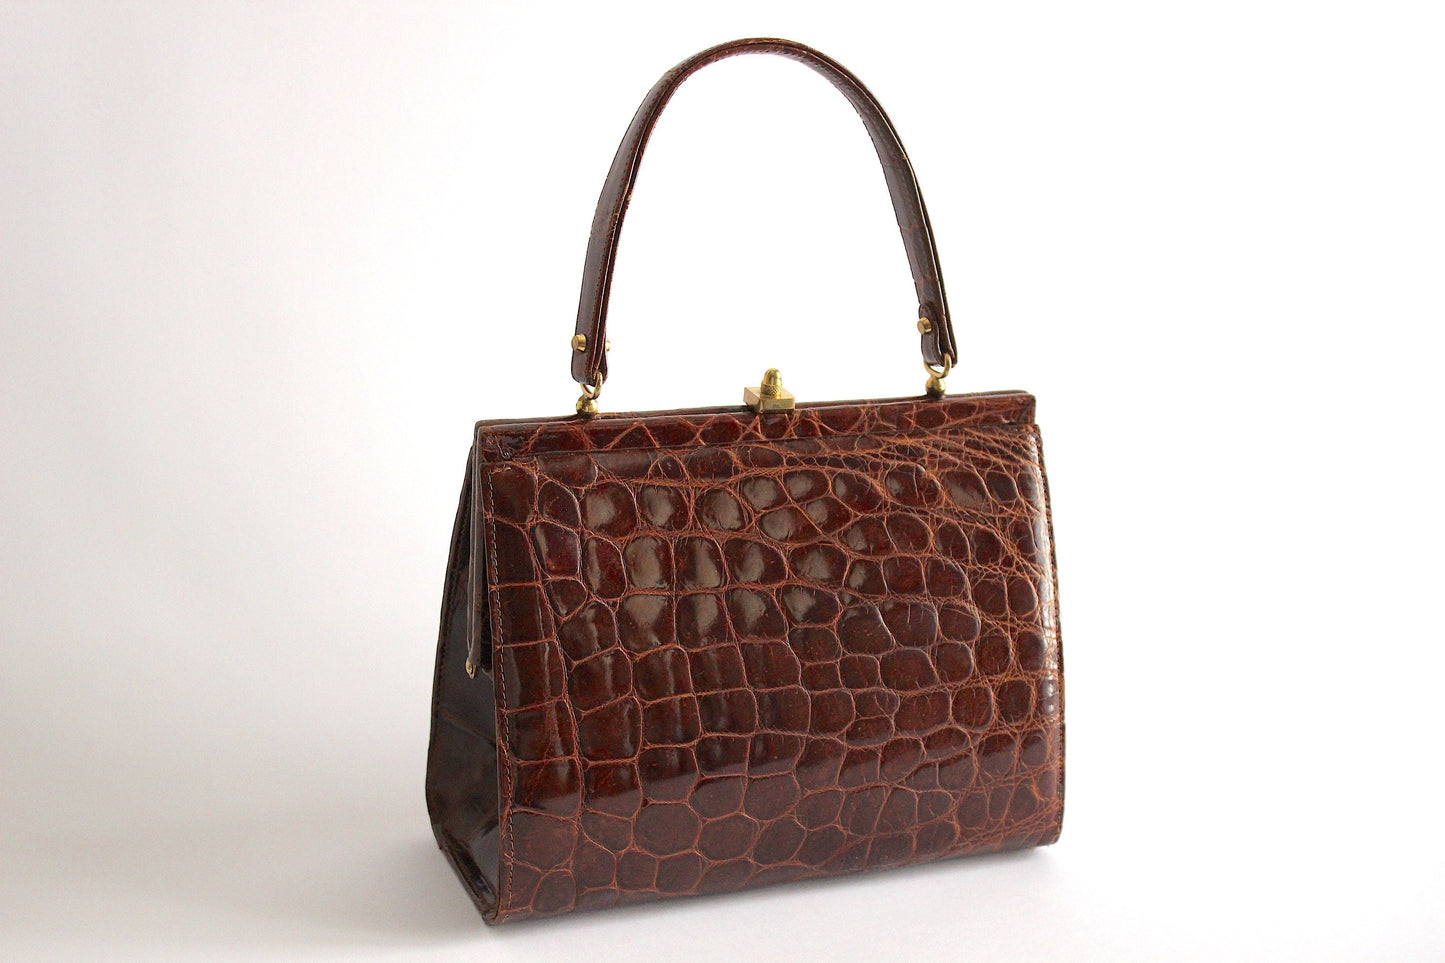 Vintage Elegance Rescued: 1960s Brown Glossy Leather Handbag from Vienna